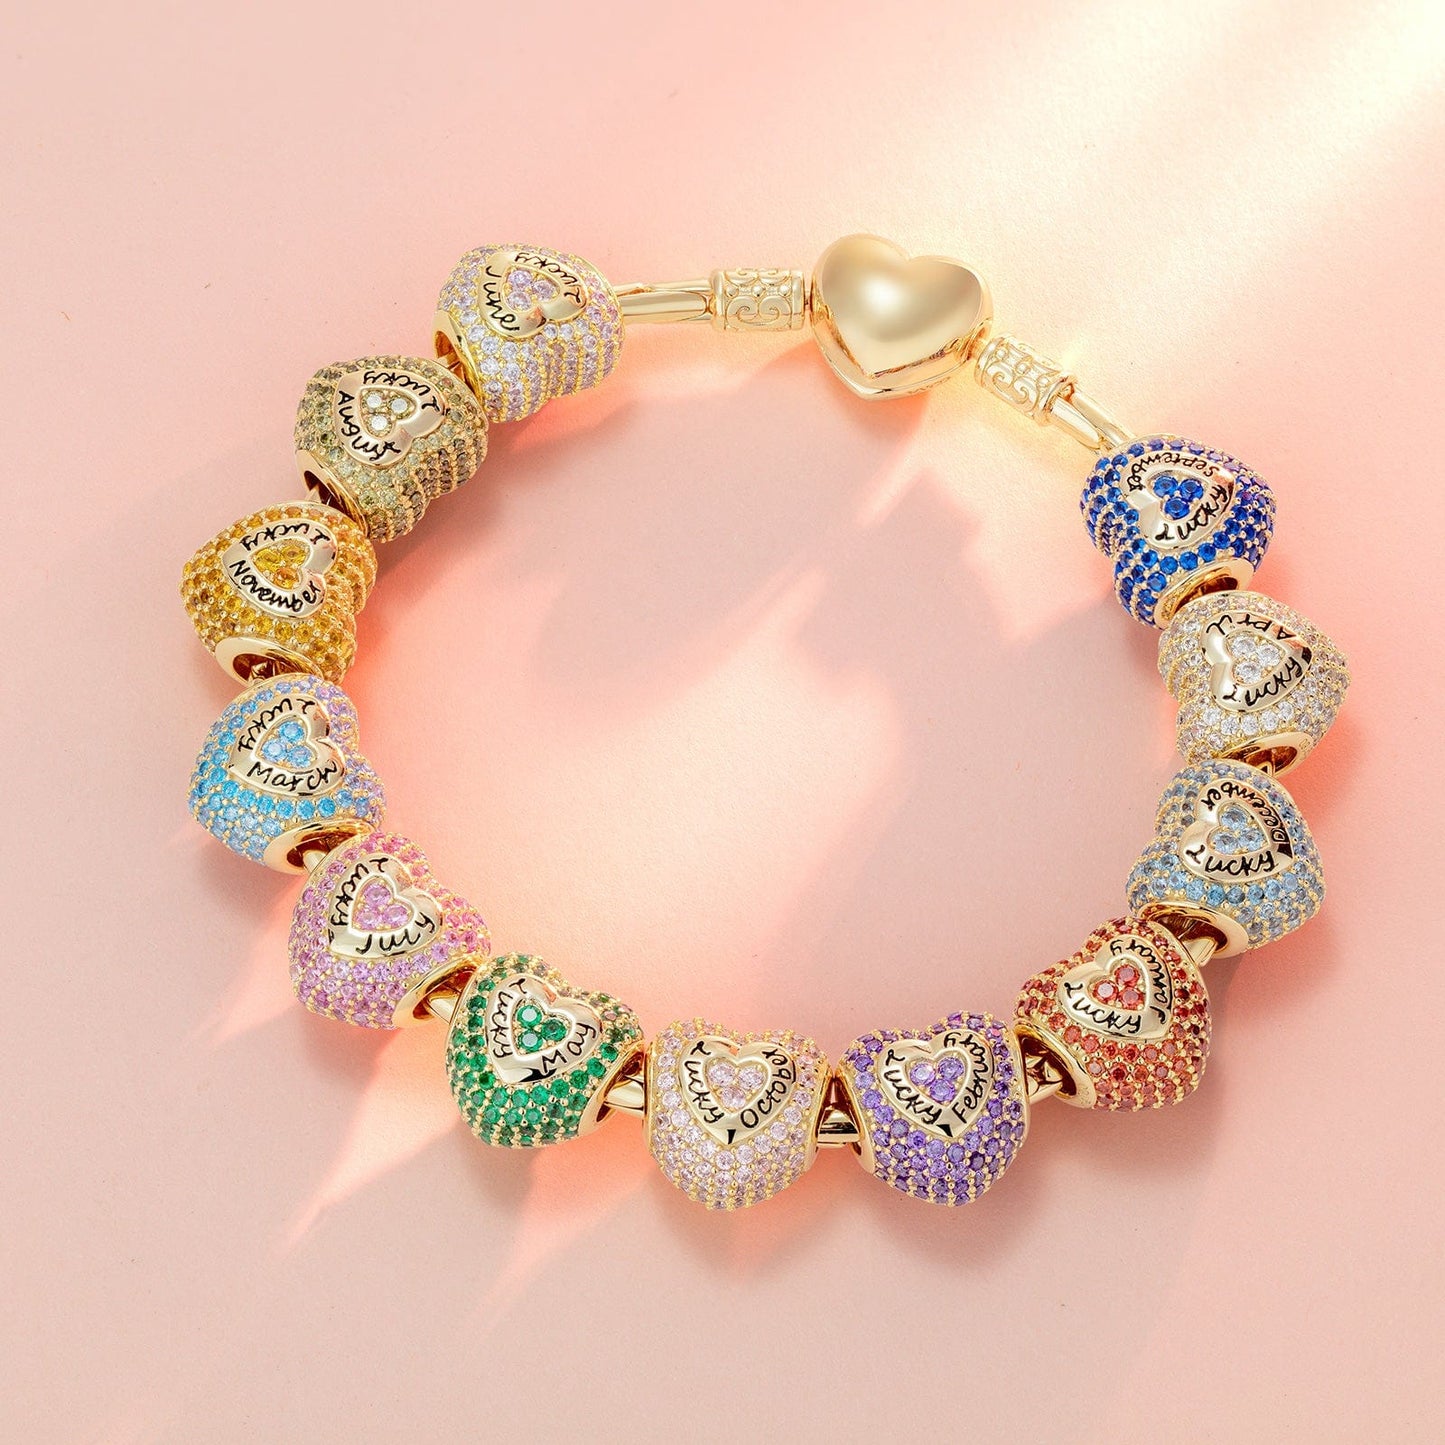 September Love Heart Birthstone Tarnish-resistant Silver Charms With Enamel In 14K Gold Plated